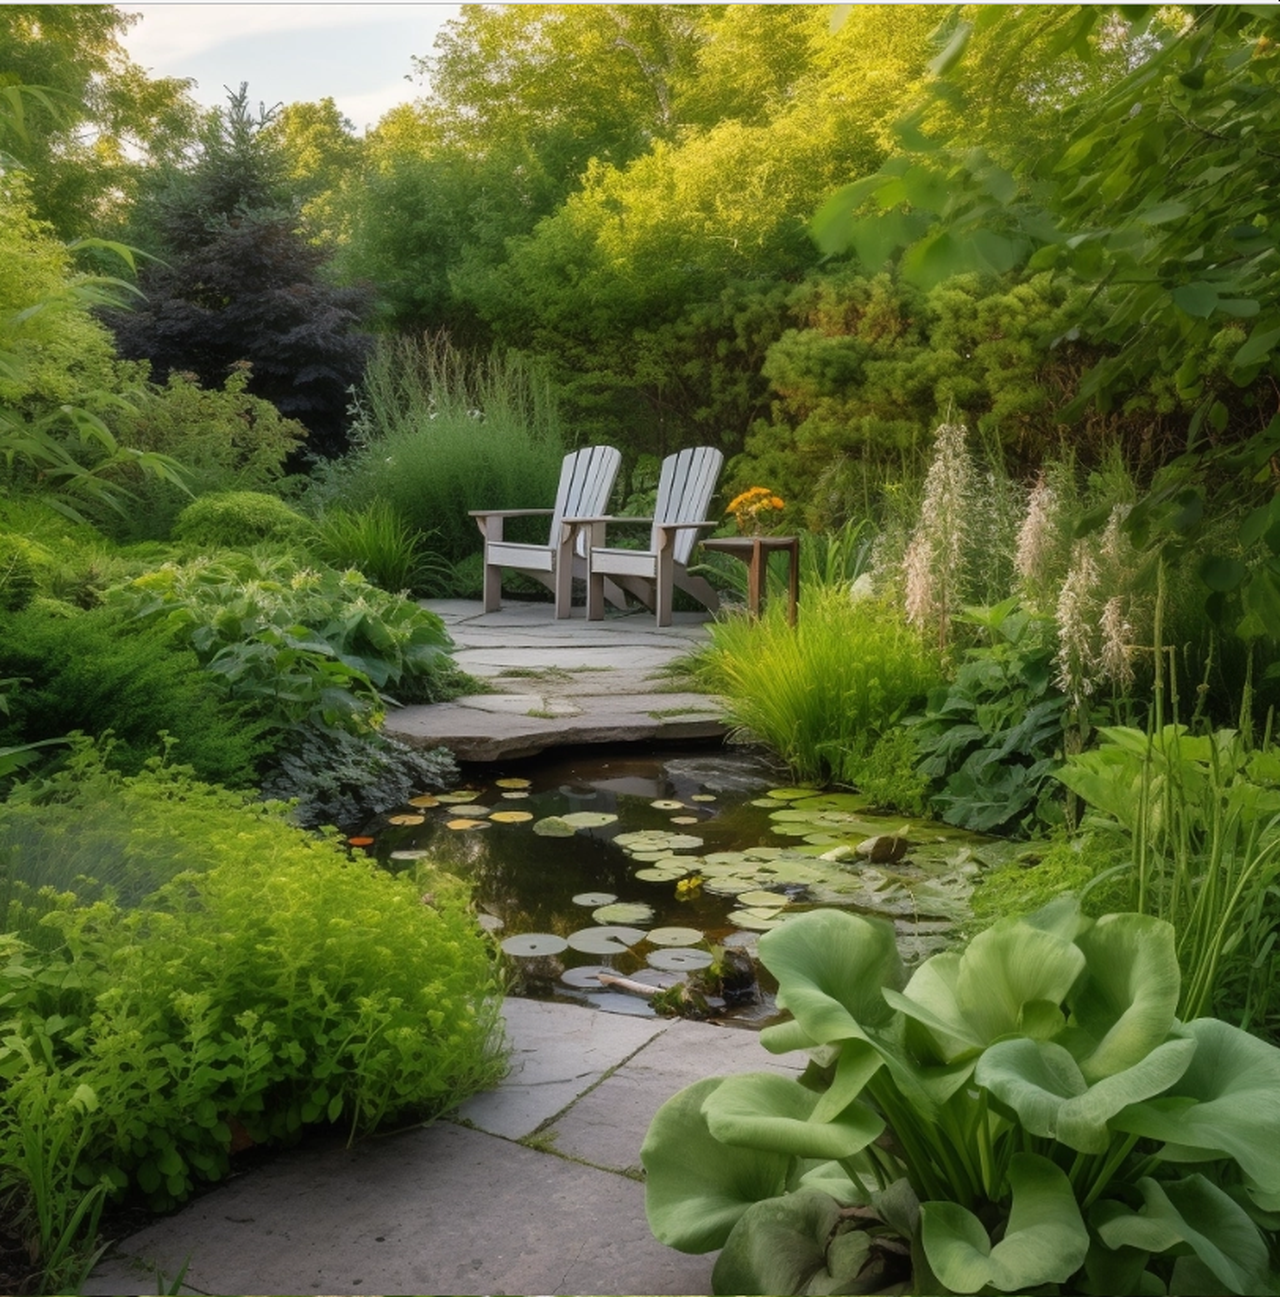 Step-by-step Guide to Transform Your Backyard into an Eco-friendly Oasis